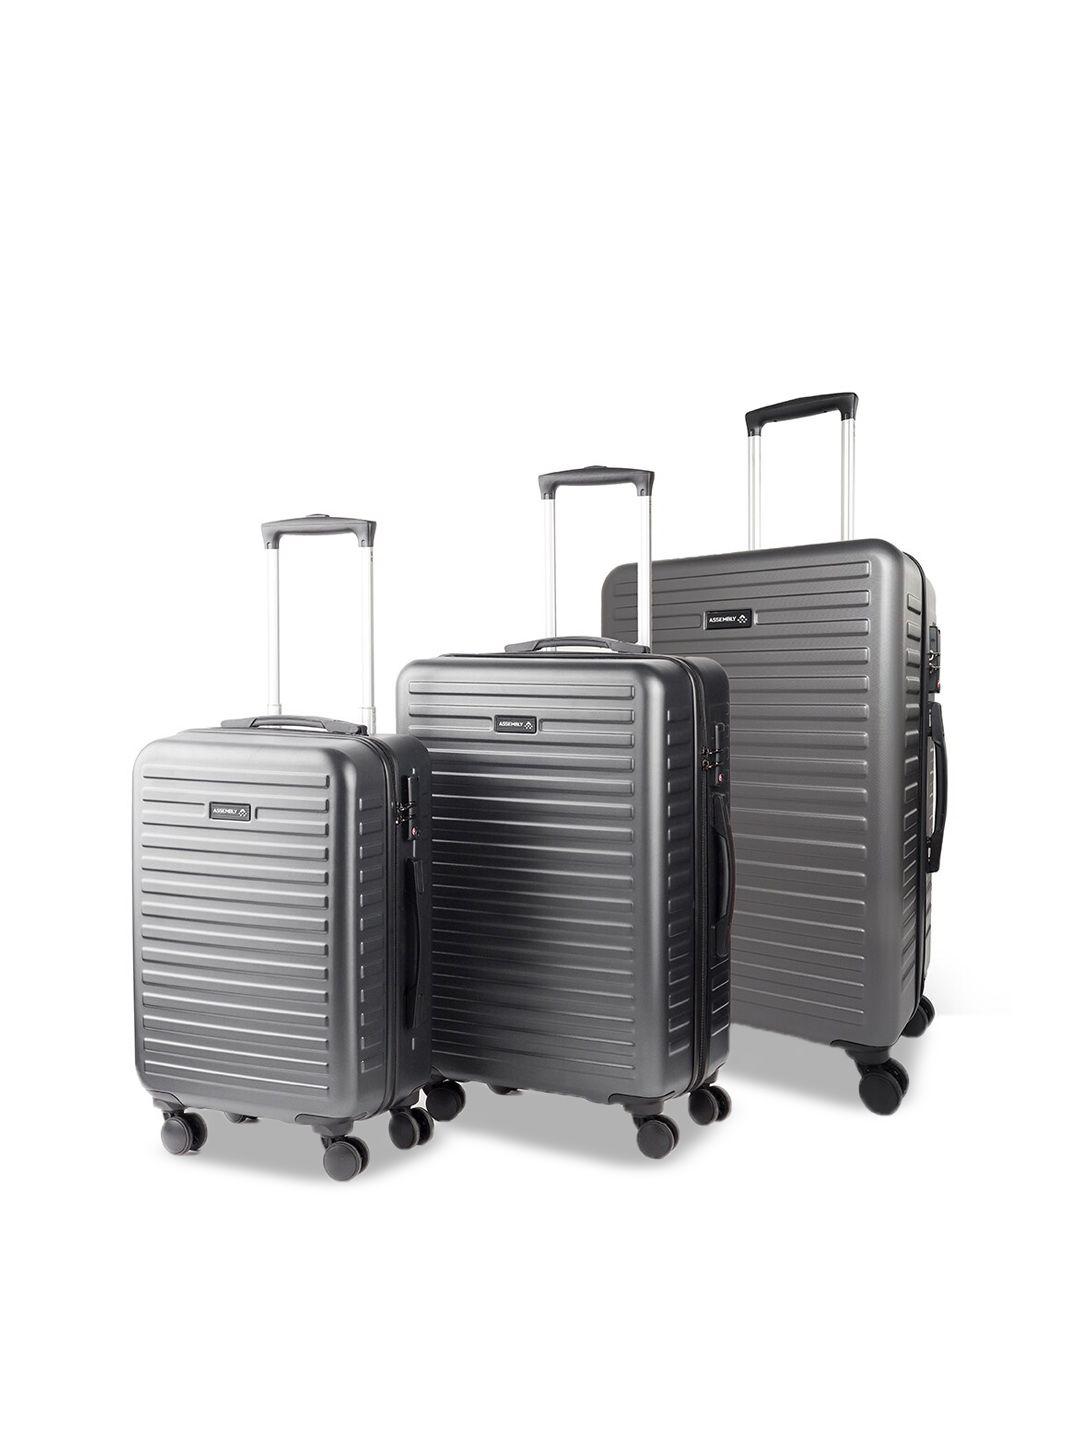 assembly set of 3 textured hard-sided suitcase